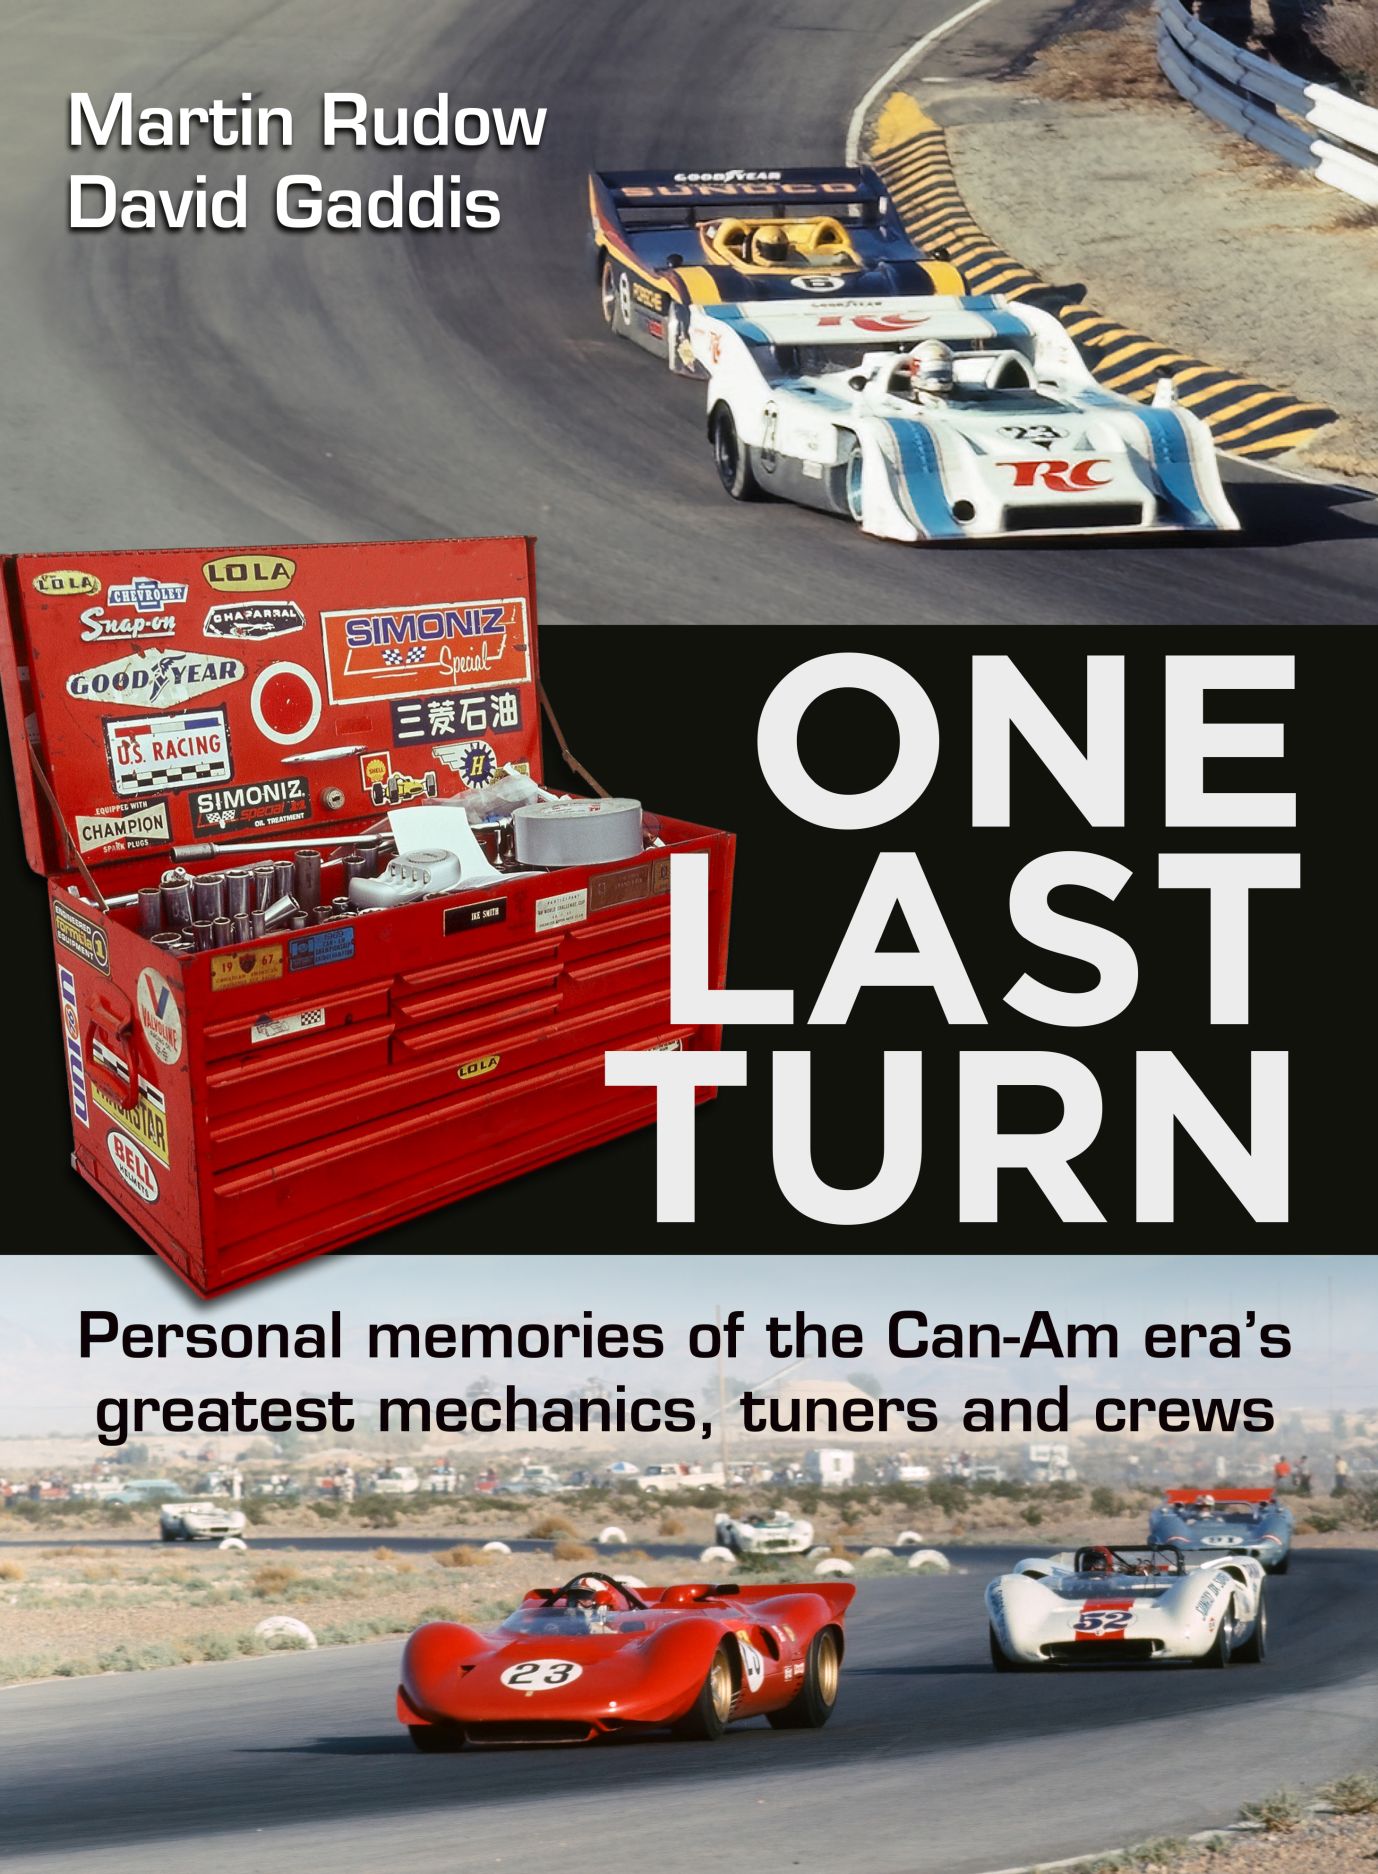 One Last Turn: Personal memories Rudow, Gaddis era\'s Can-Am of crews, the mechanics, greatest and tuners